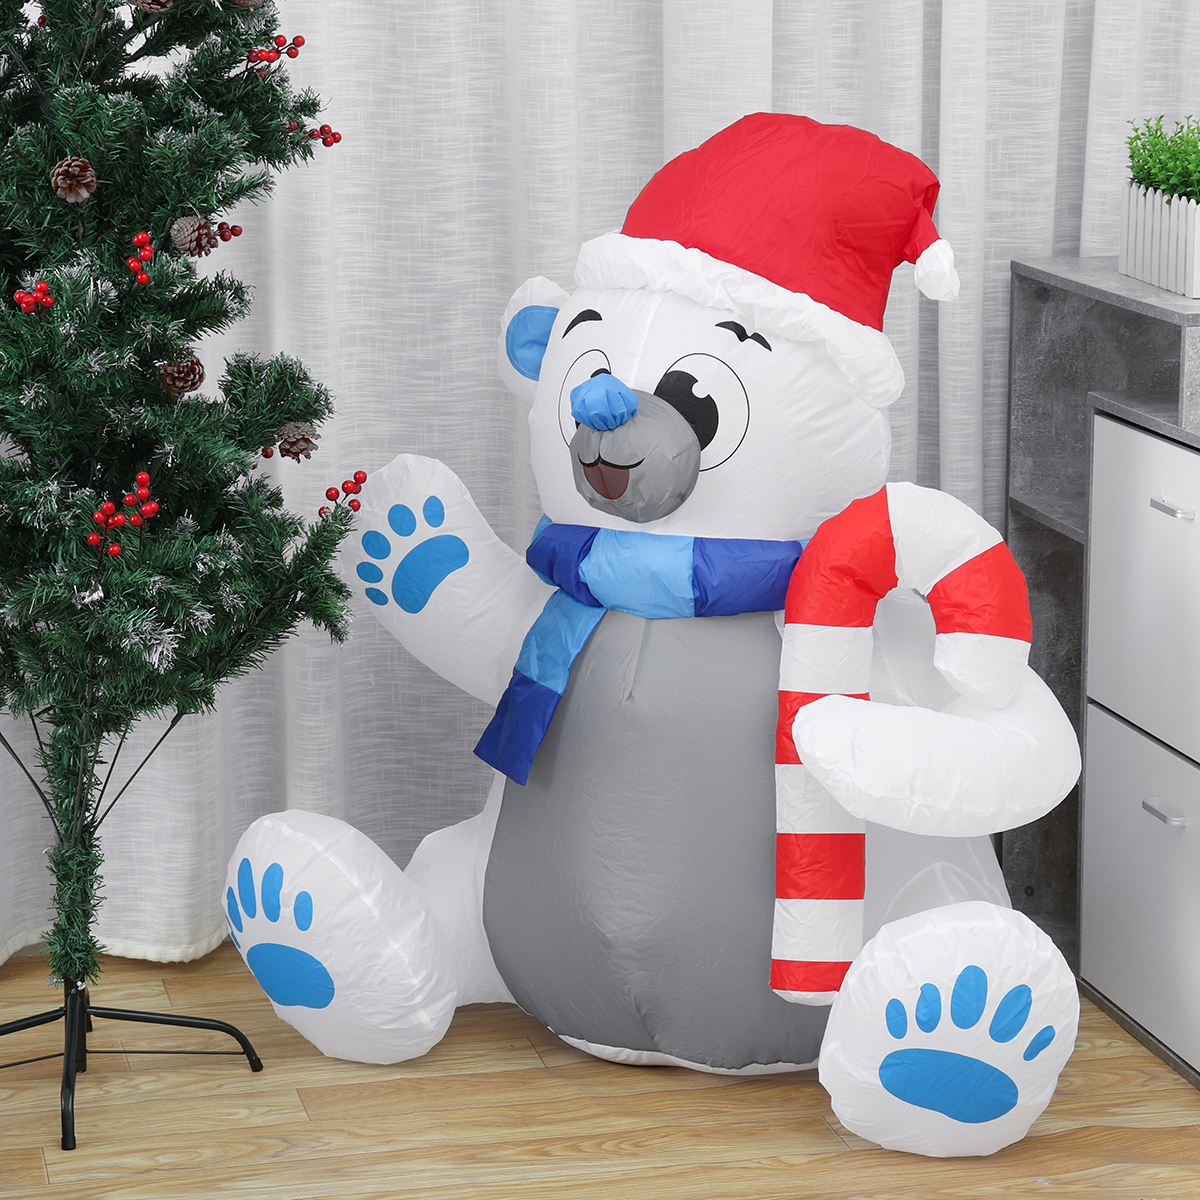 12M-LED-Christmas-Waterproof-Polyester-Built-In-Blower-UV-resistant-Inflatable-Bear-Toy-for-Christma-1829733-3